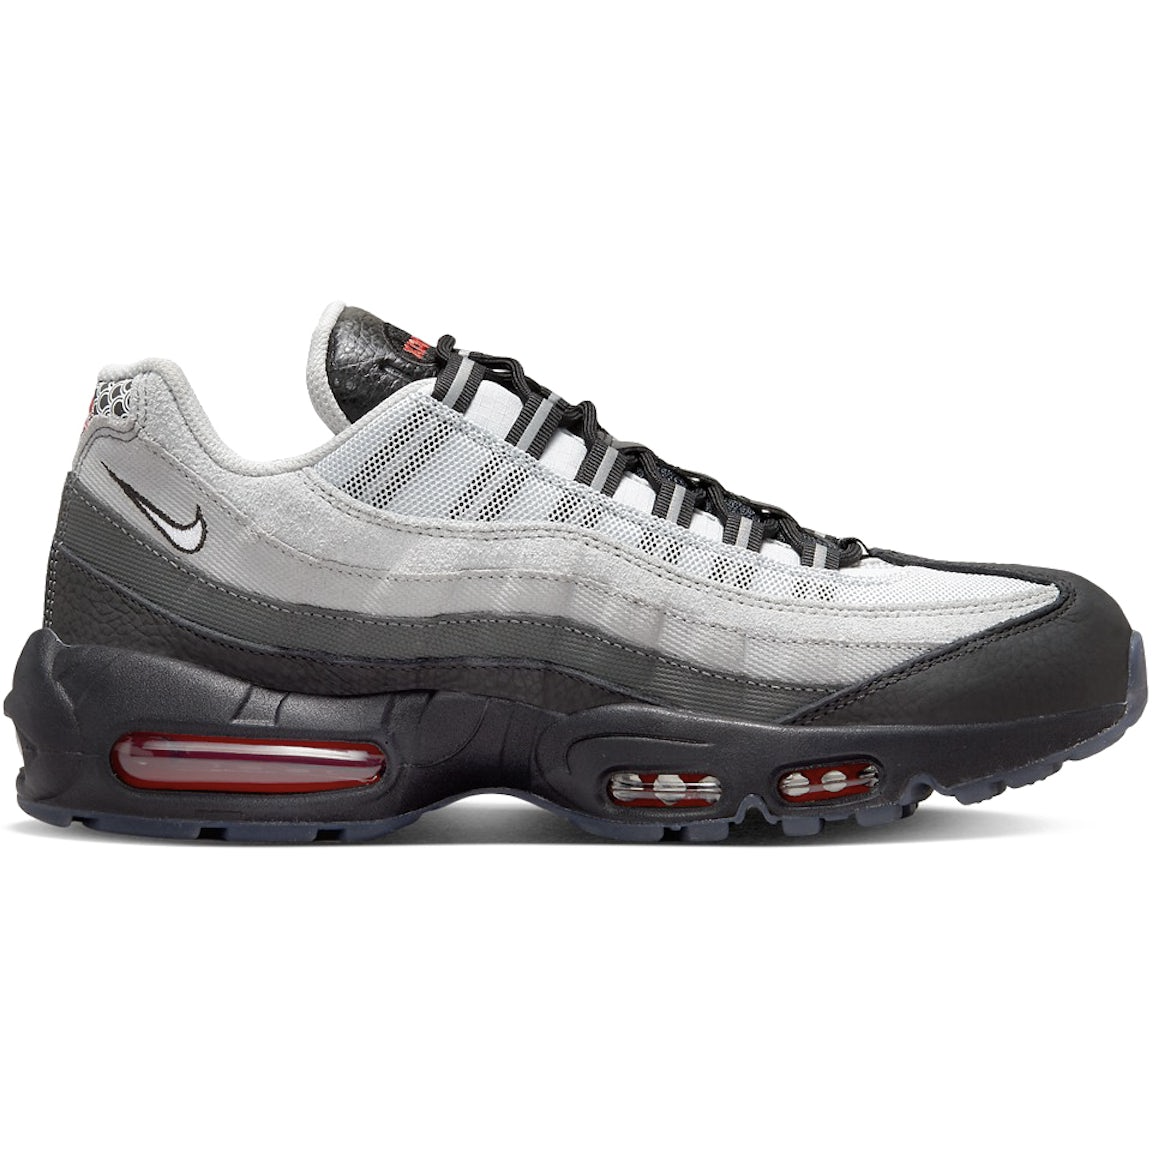 Nike Air Max 95 Fish Scales by Nike from £215.00